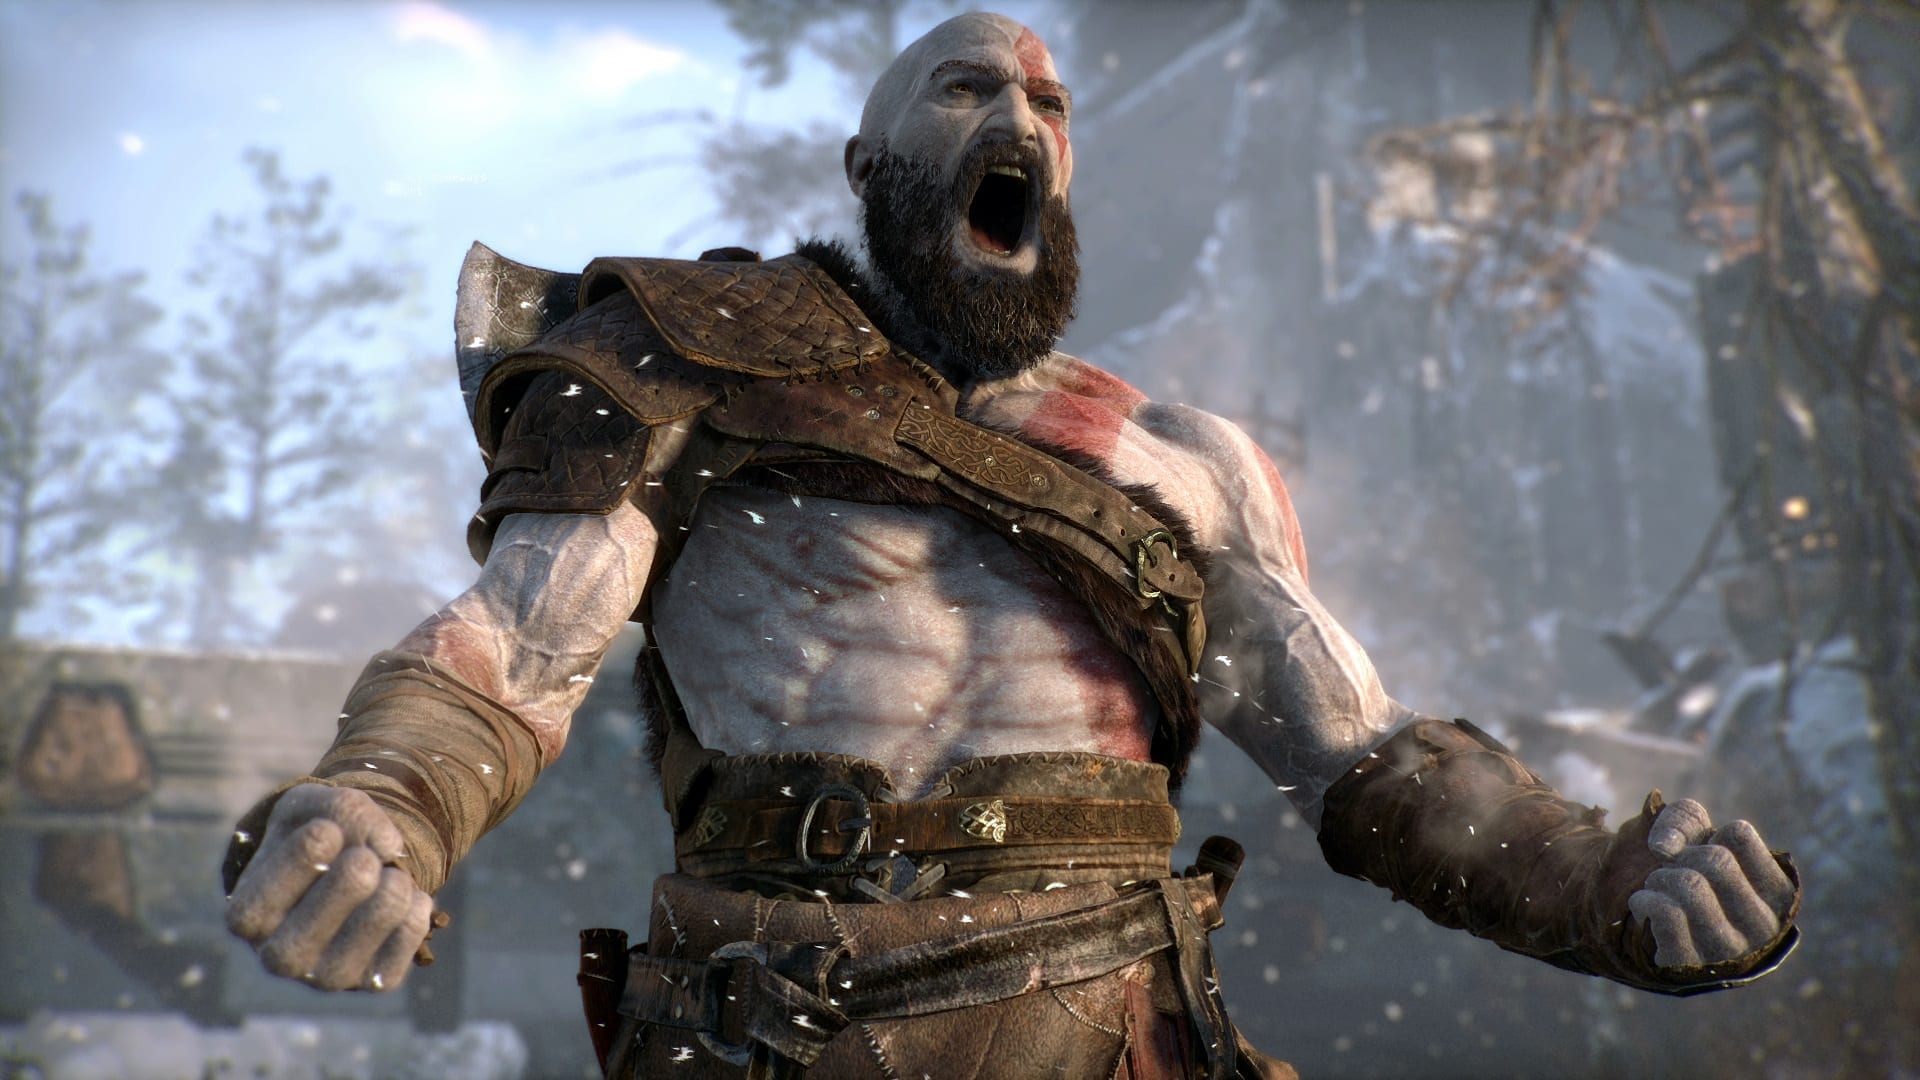 Win A Free Copy Of God Of War On PC!